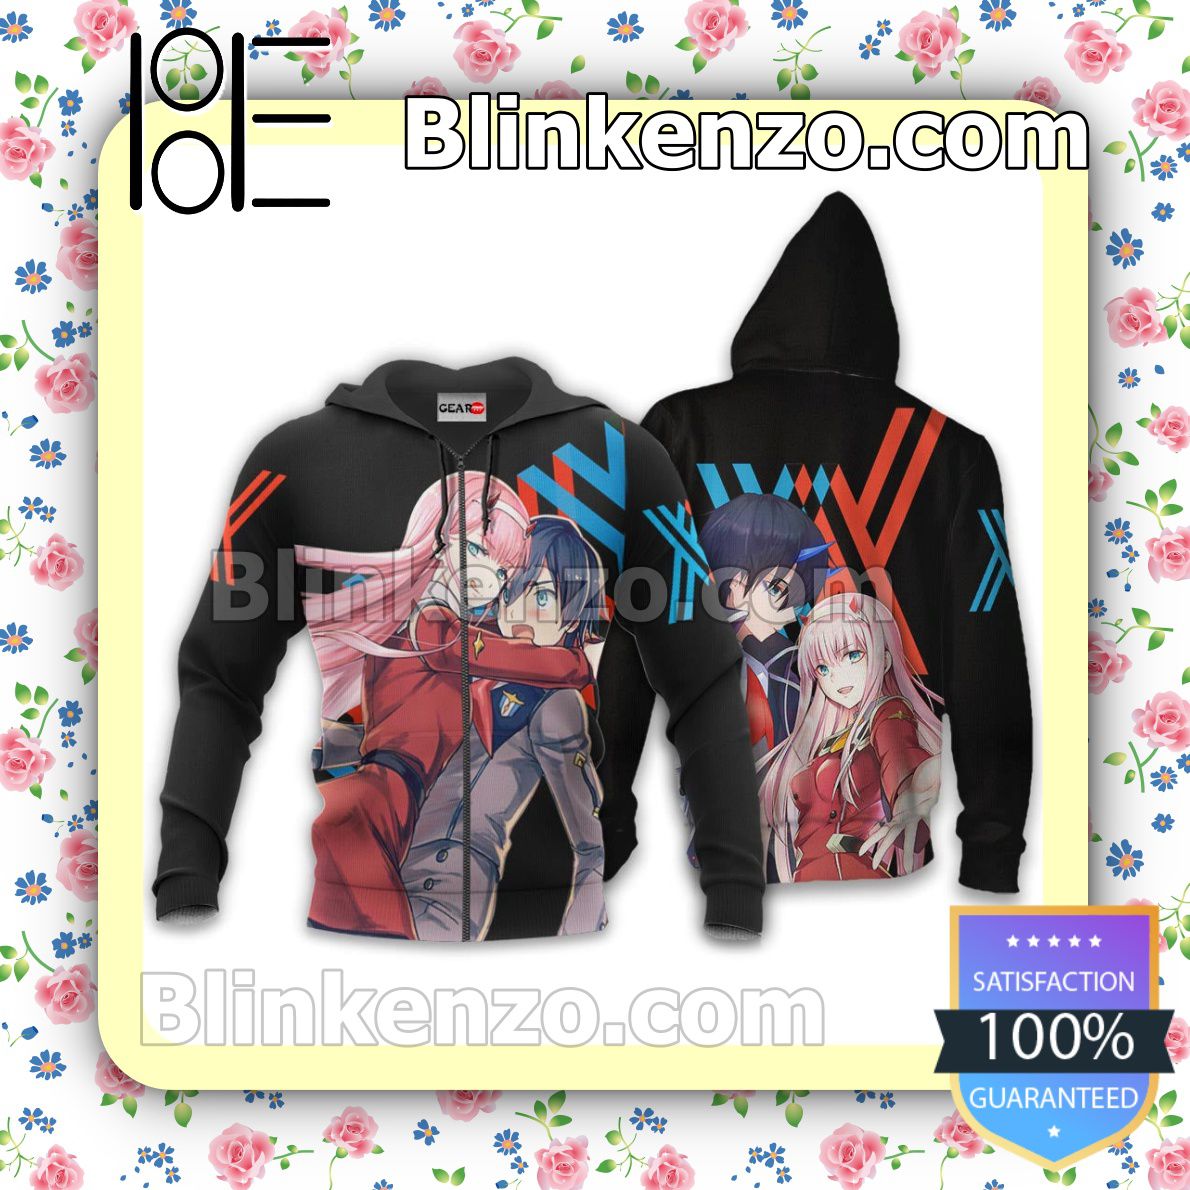 Hiro and Zero Two Darling In The Franxx Anime Personalized T-shirt, Hoodie, Long Sleeve, Bomber Jacket